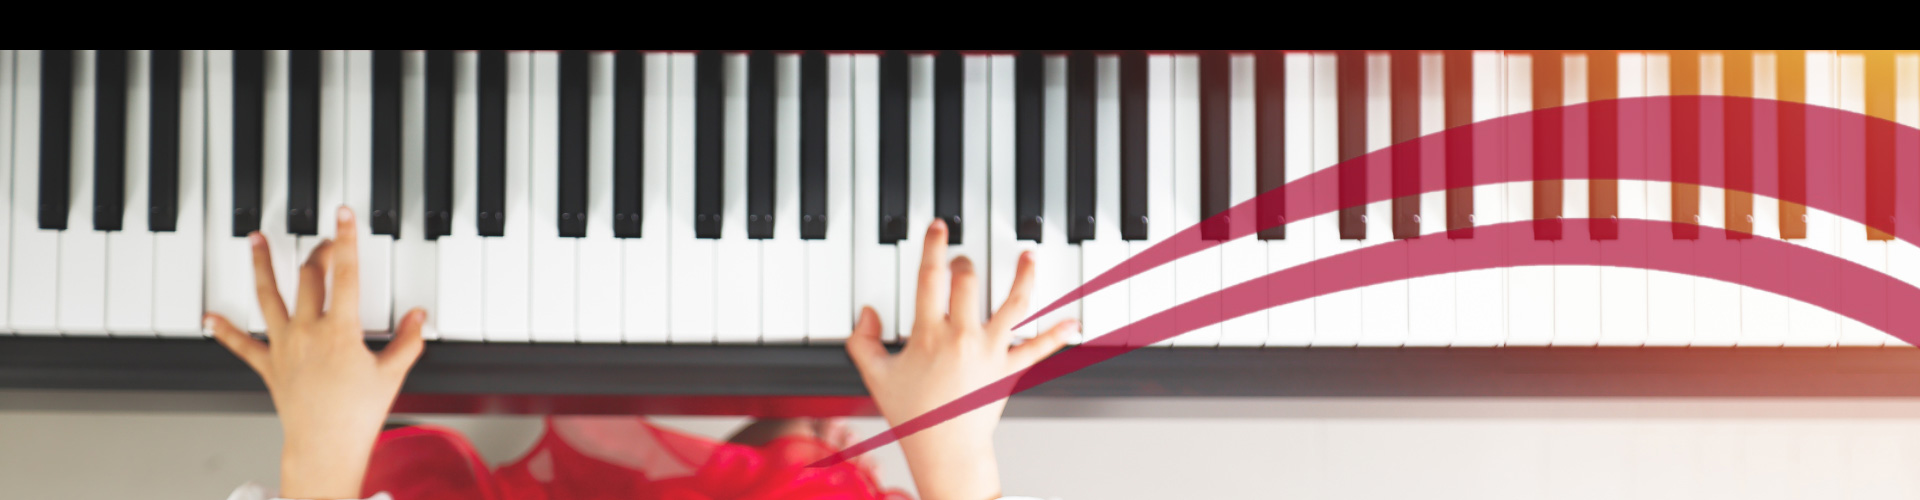 How To Learn A Song On The Piano